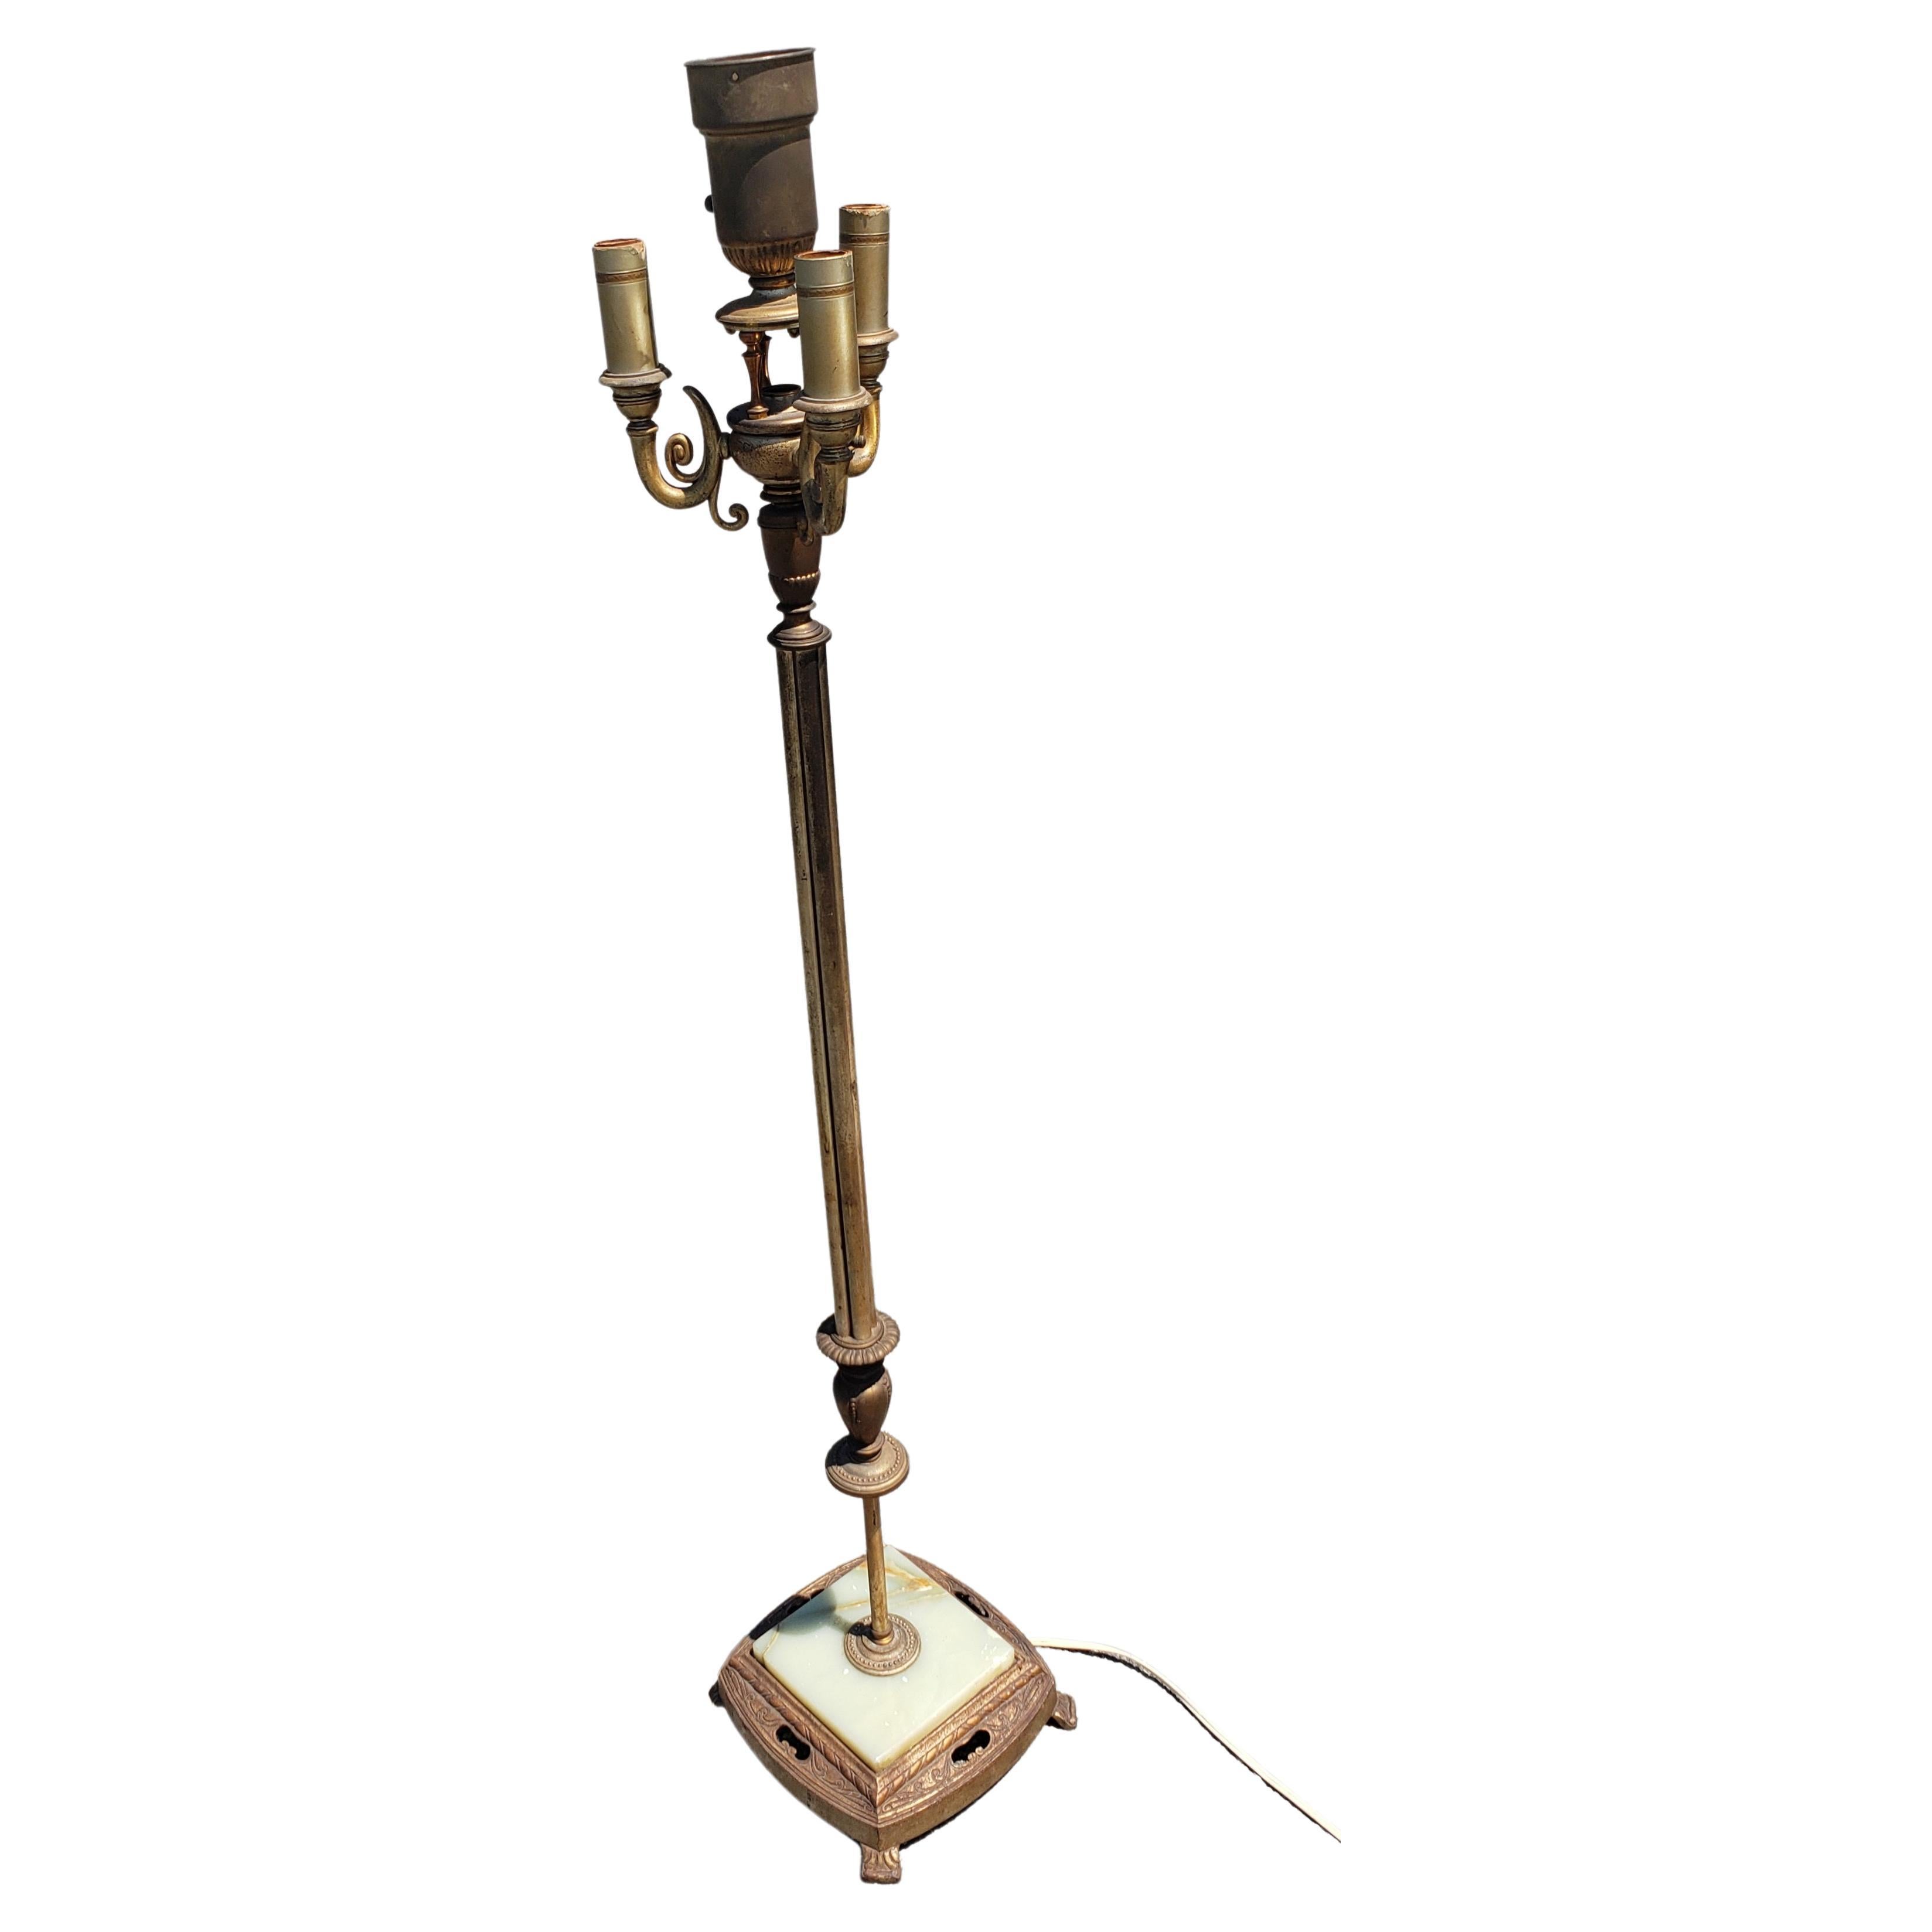 Baroque Late Victorian Patinated Metal and Onyx Torchiere 4-Light Floor Lamp For Sale